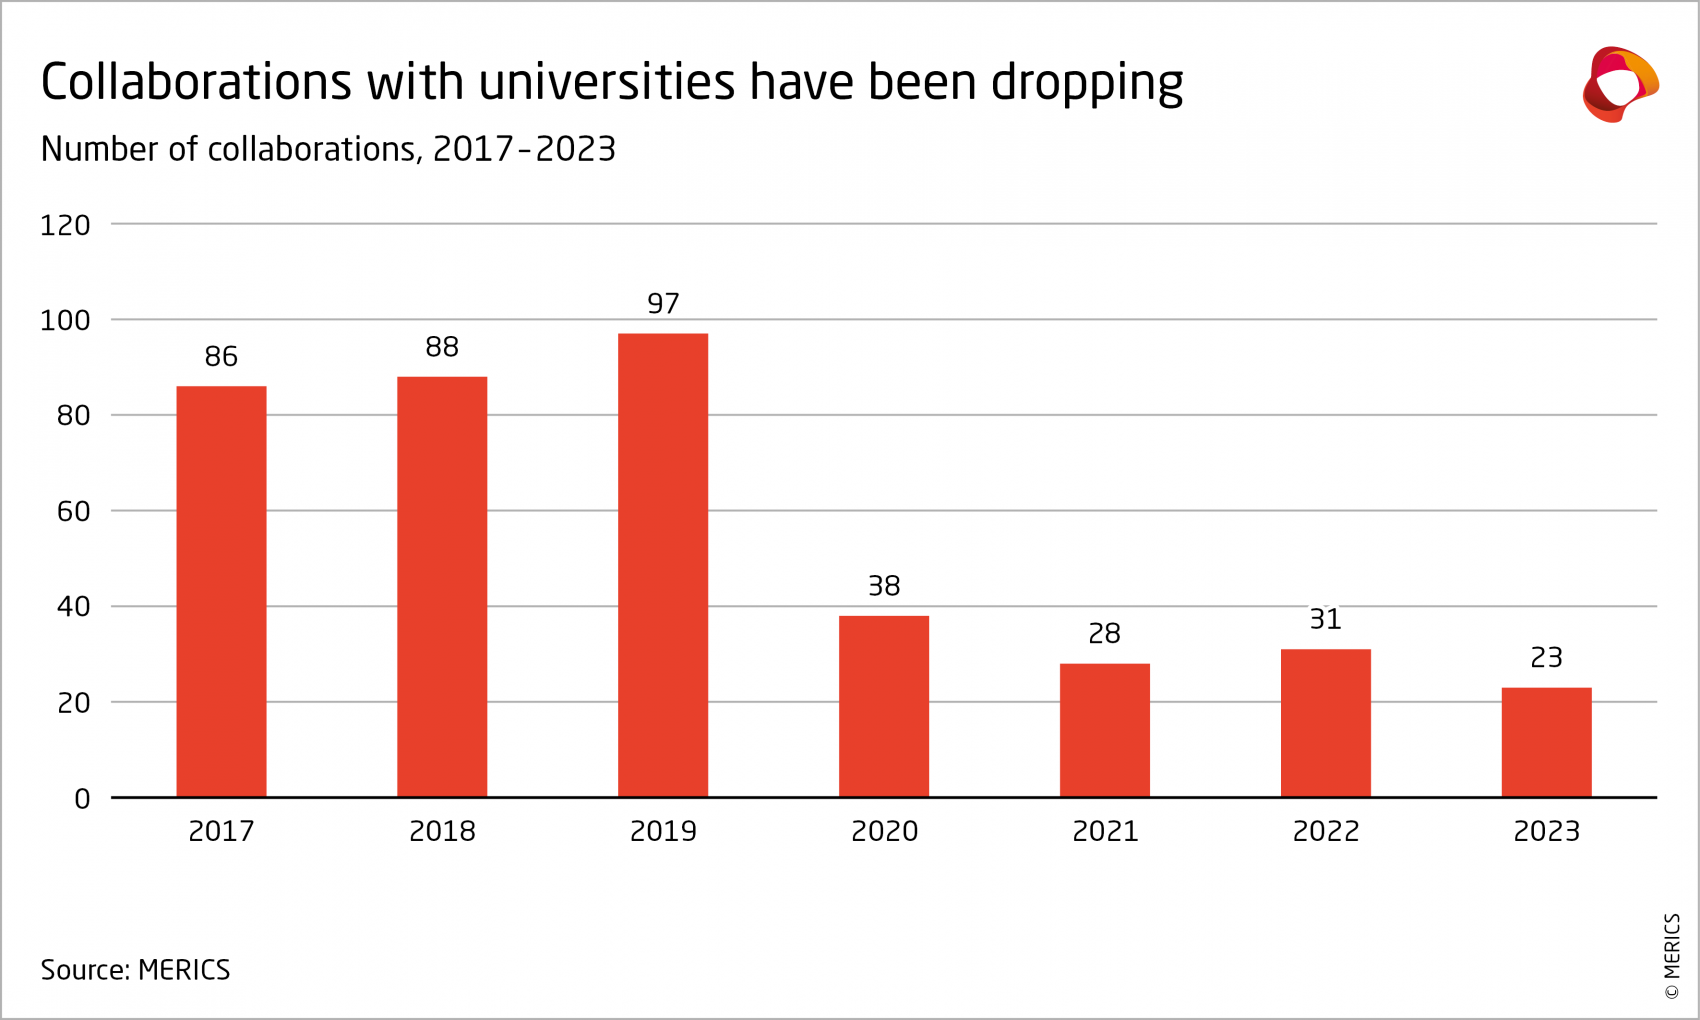 Number of collaborations with universities, 2017-2023